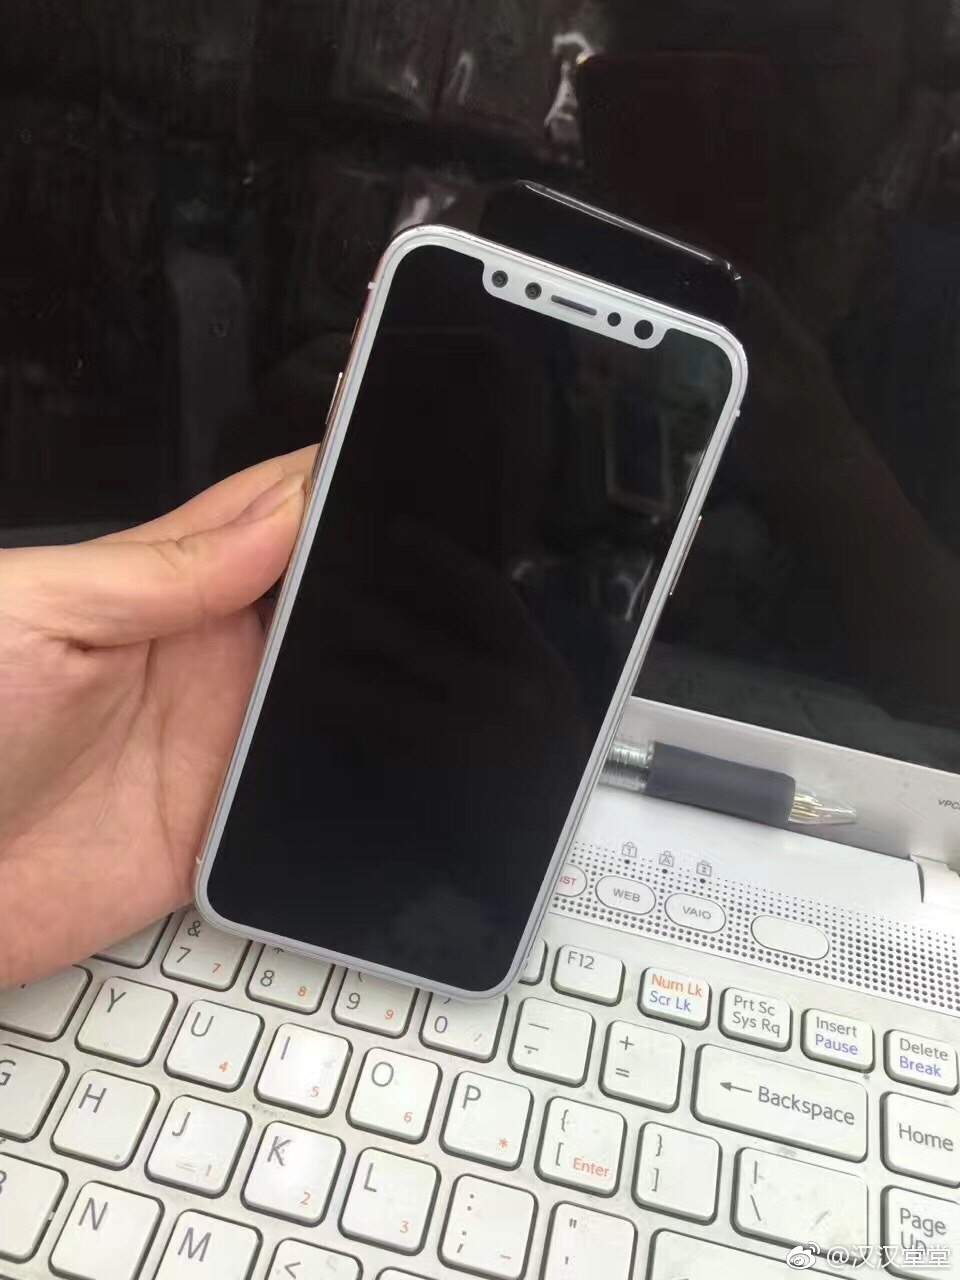 upcoming iPhone 8